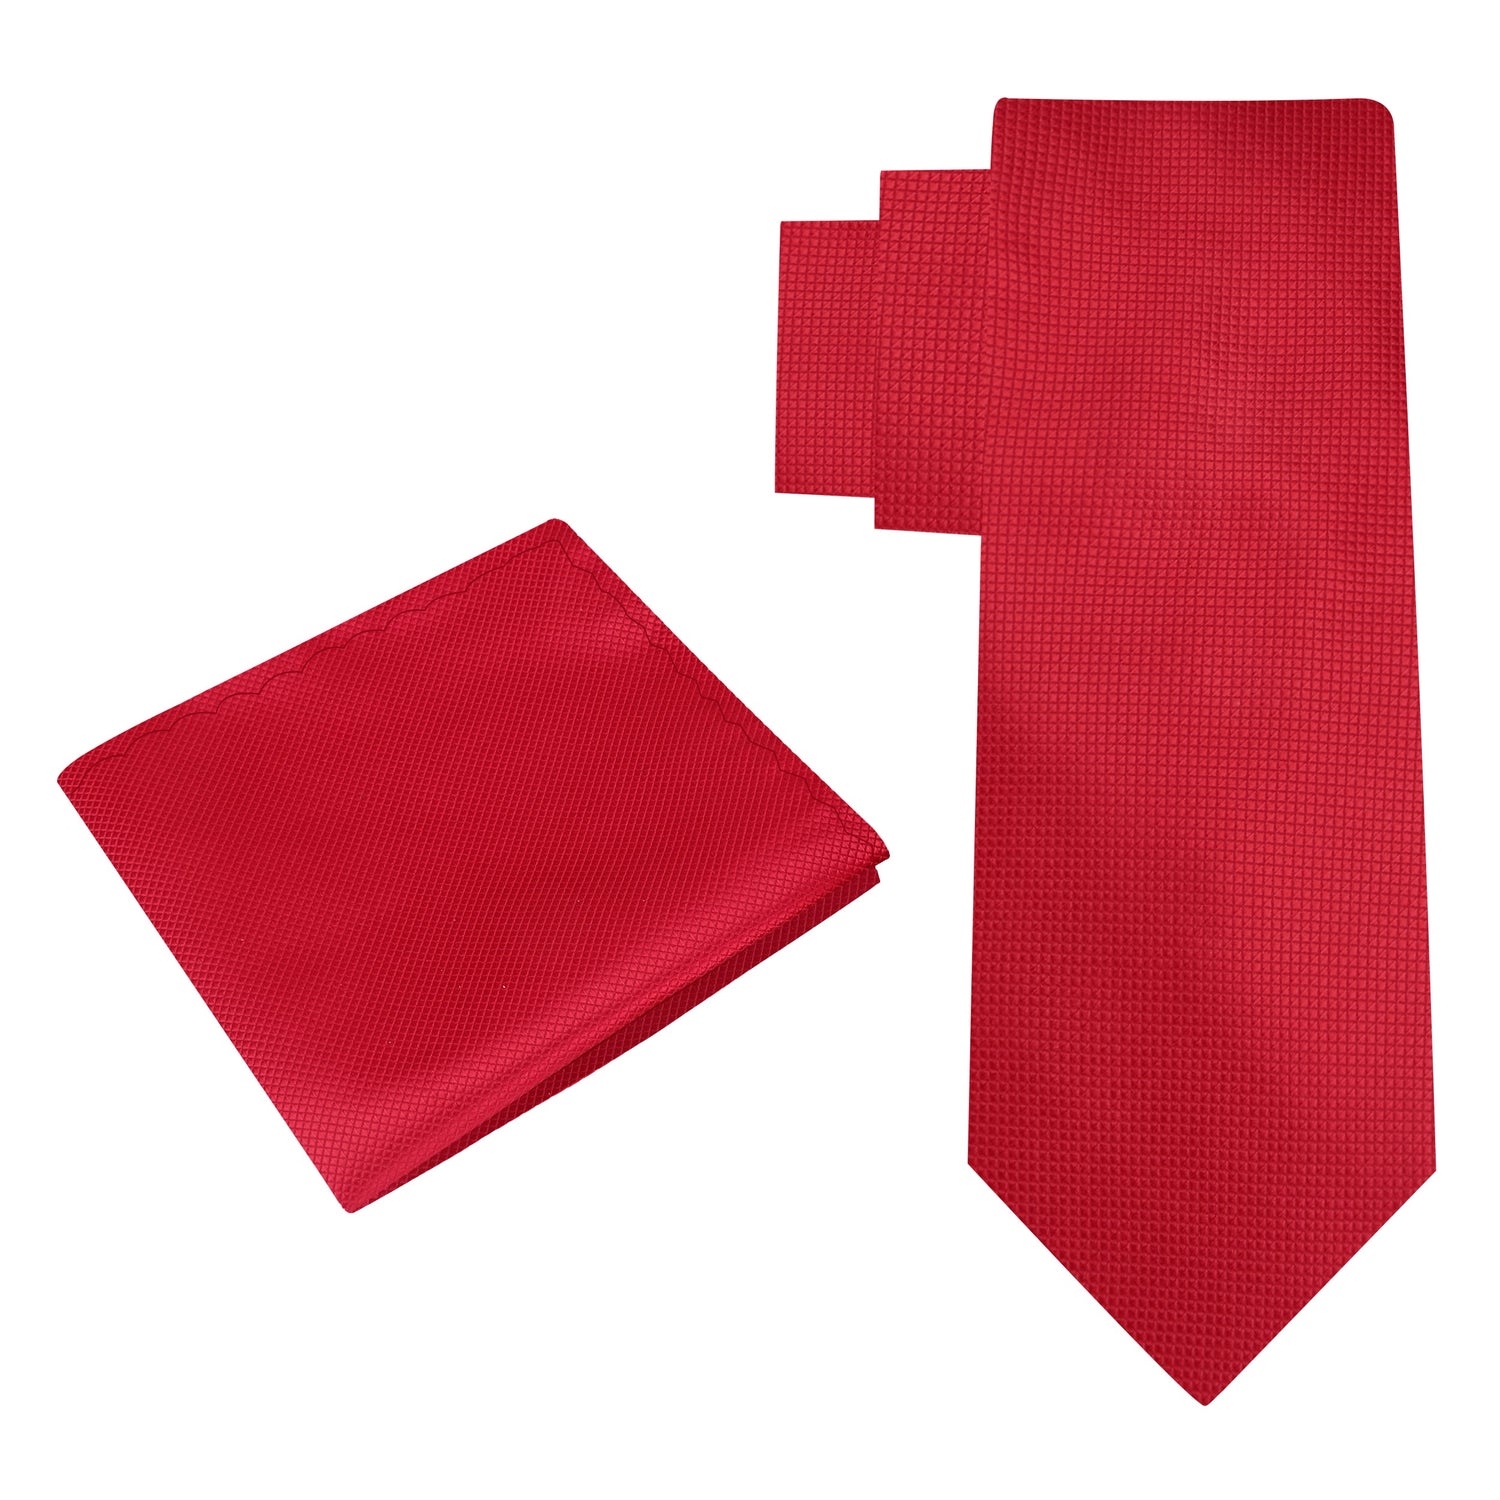 Alt View: Solid Red Necktie with Blue and Pocket Square